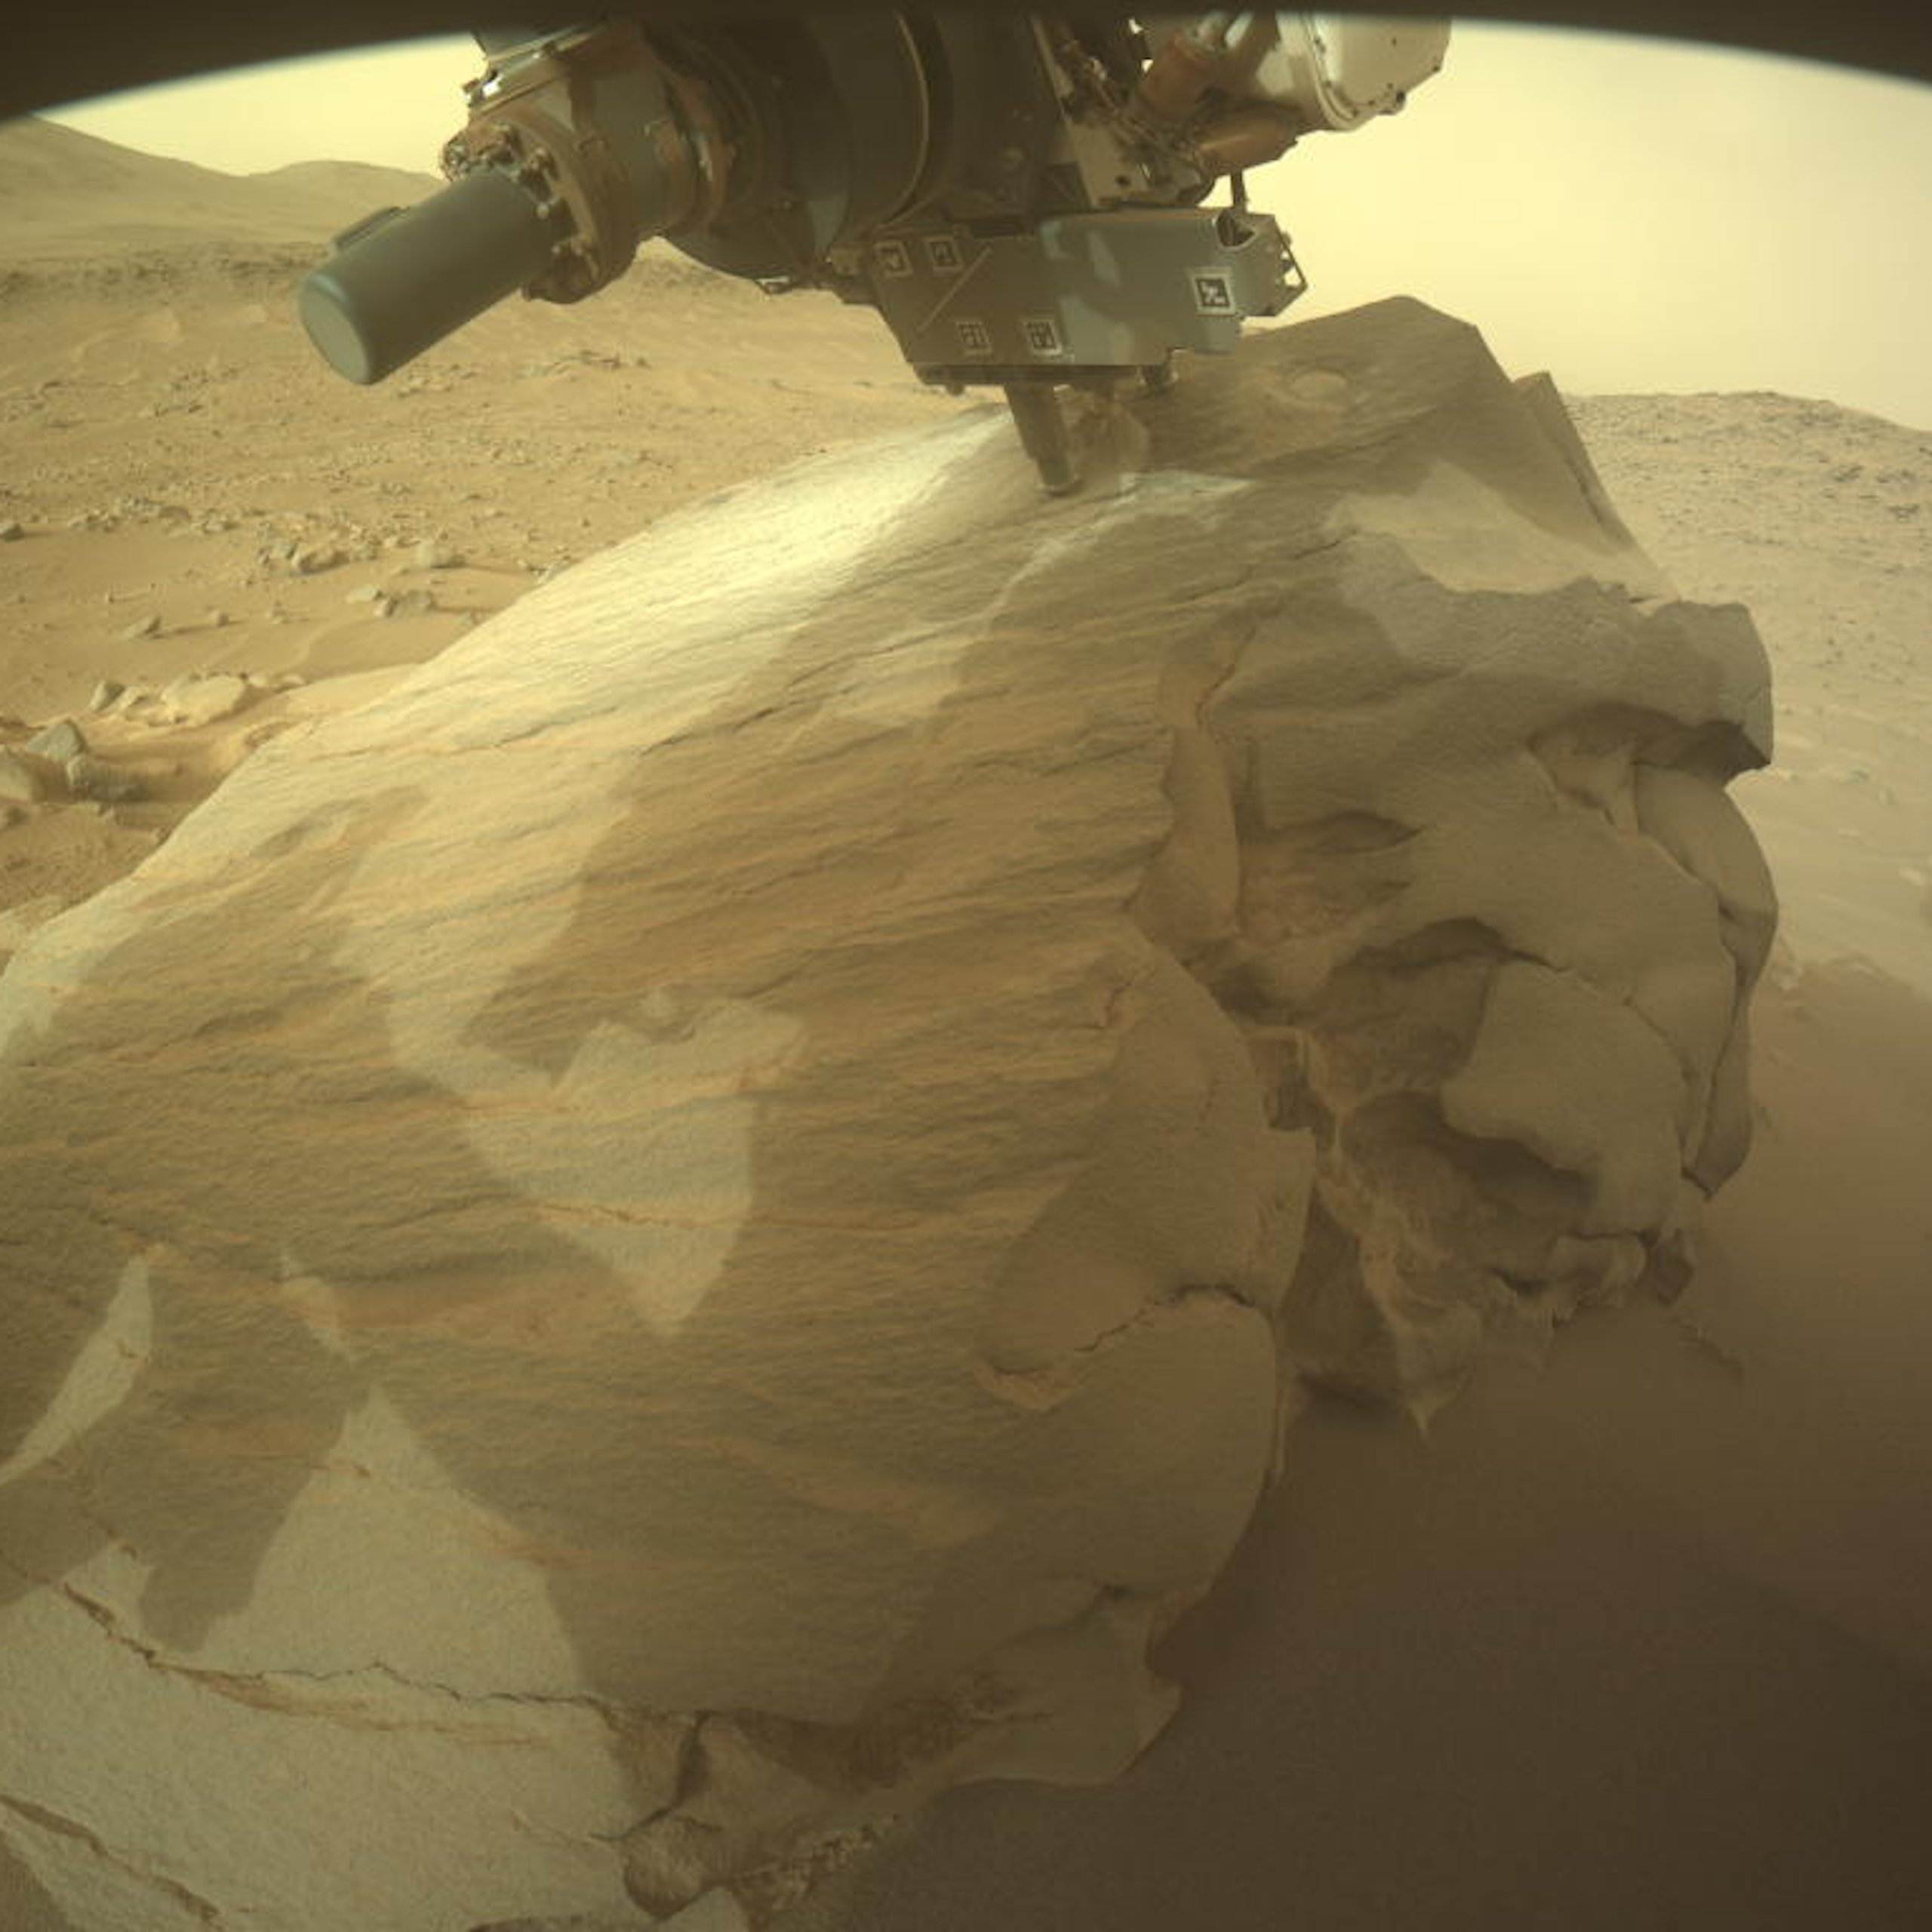 A Nasa rover has reached a promising place to search for fossilised life on Mars